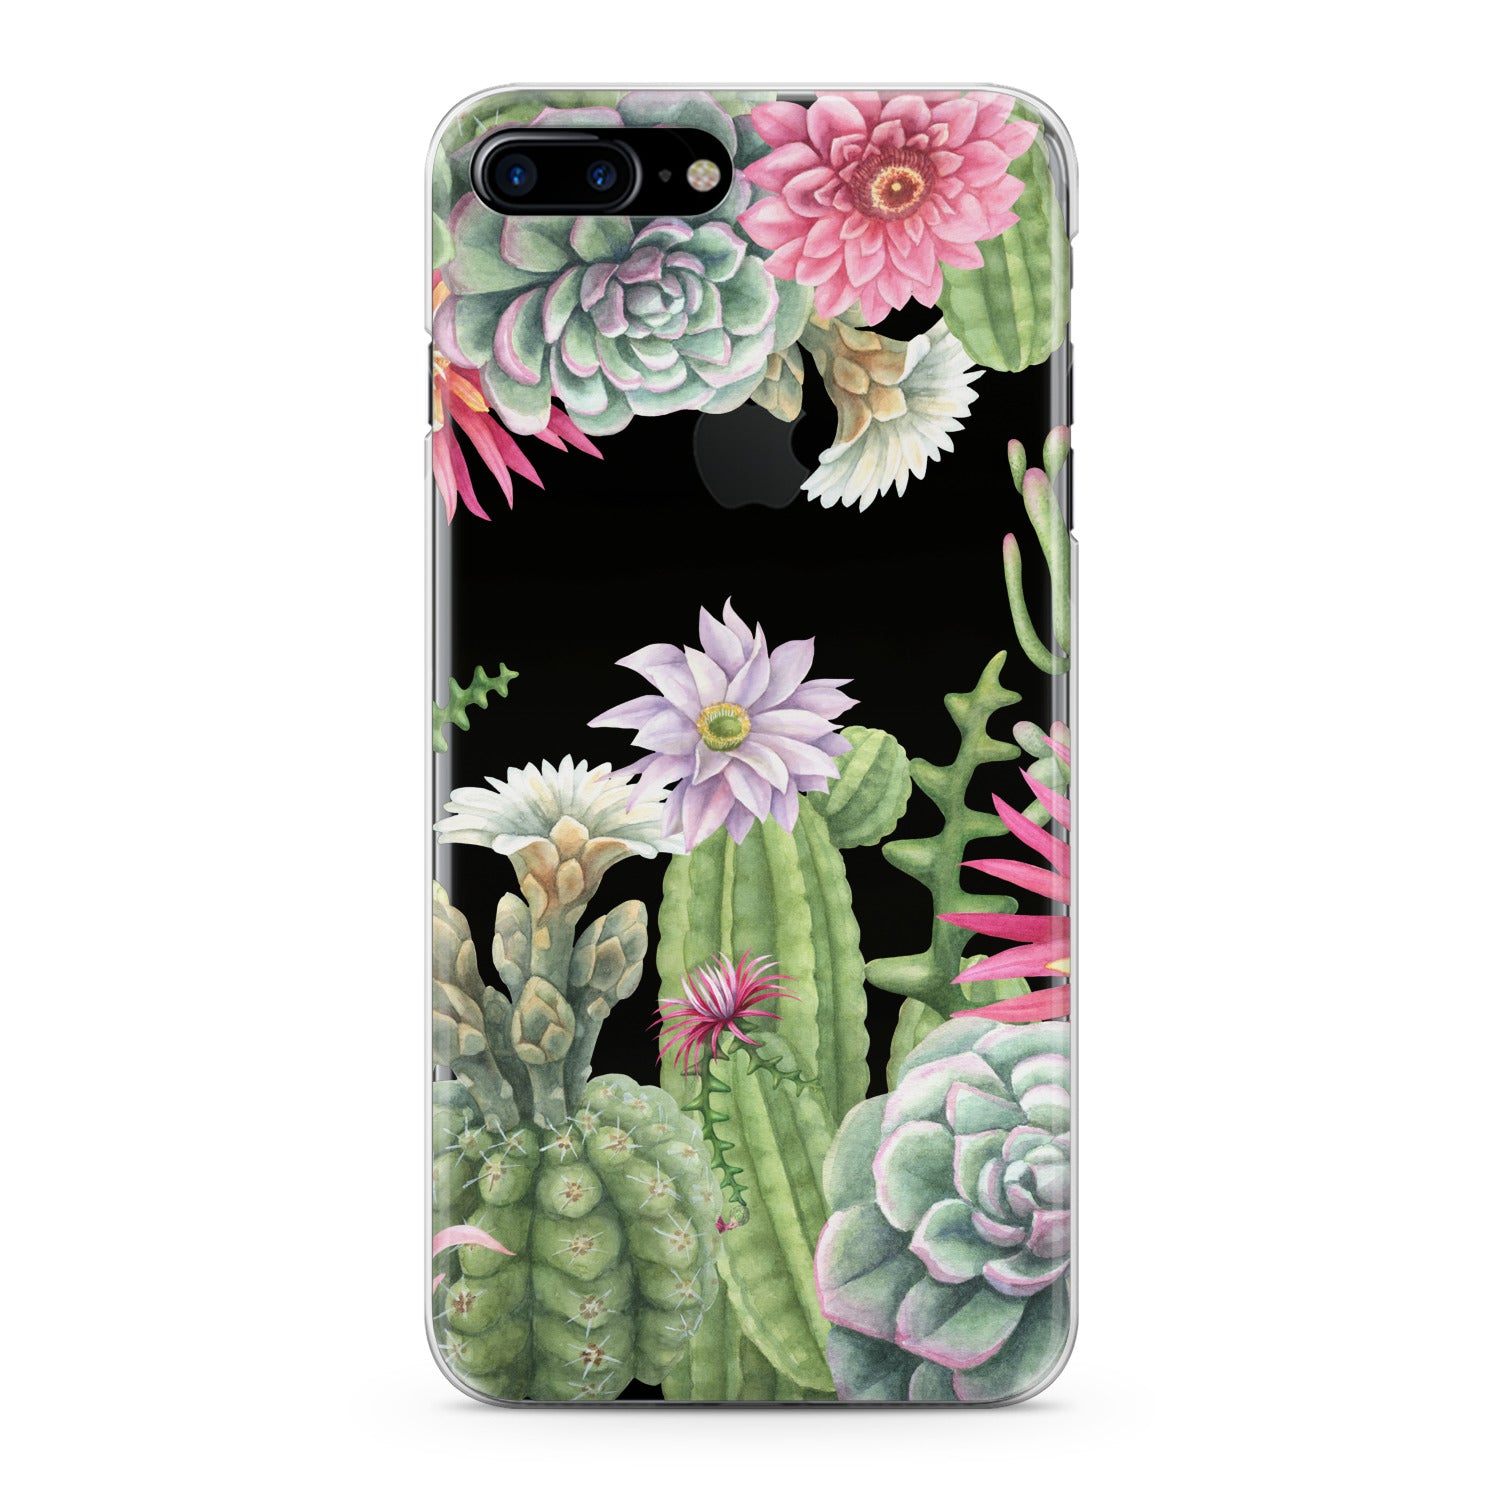 Lex Altern Floral Cactus Phone Case for your iPhone & Android phone.